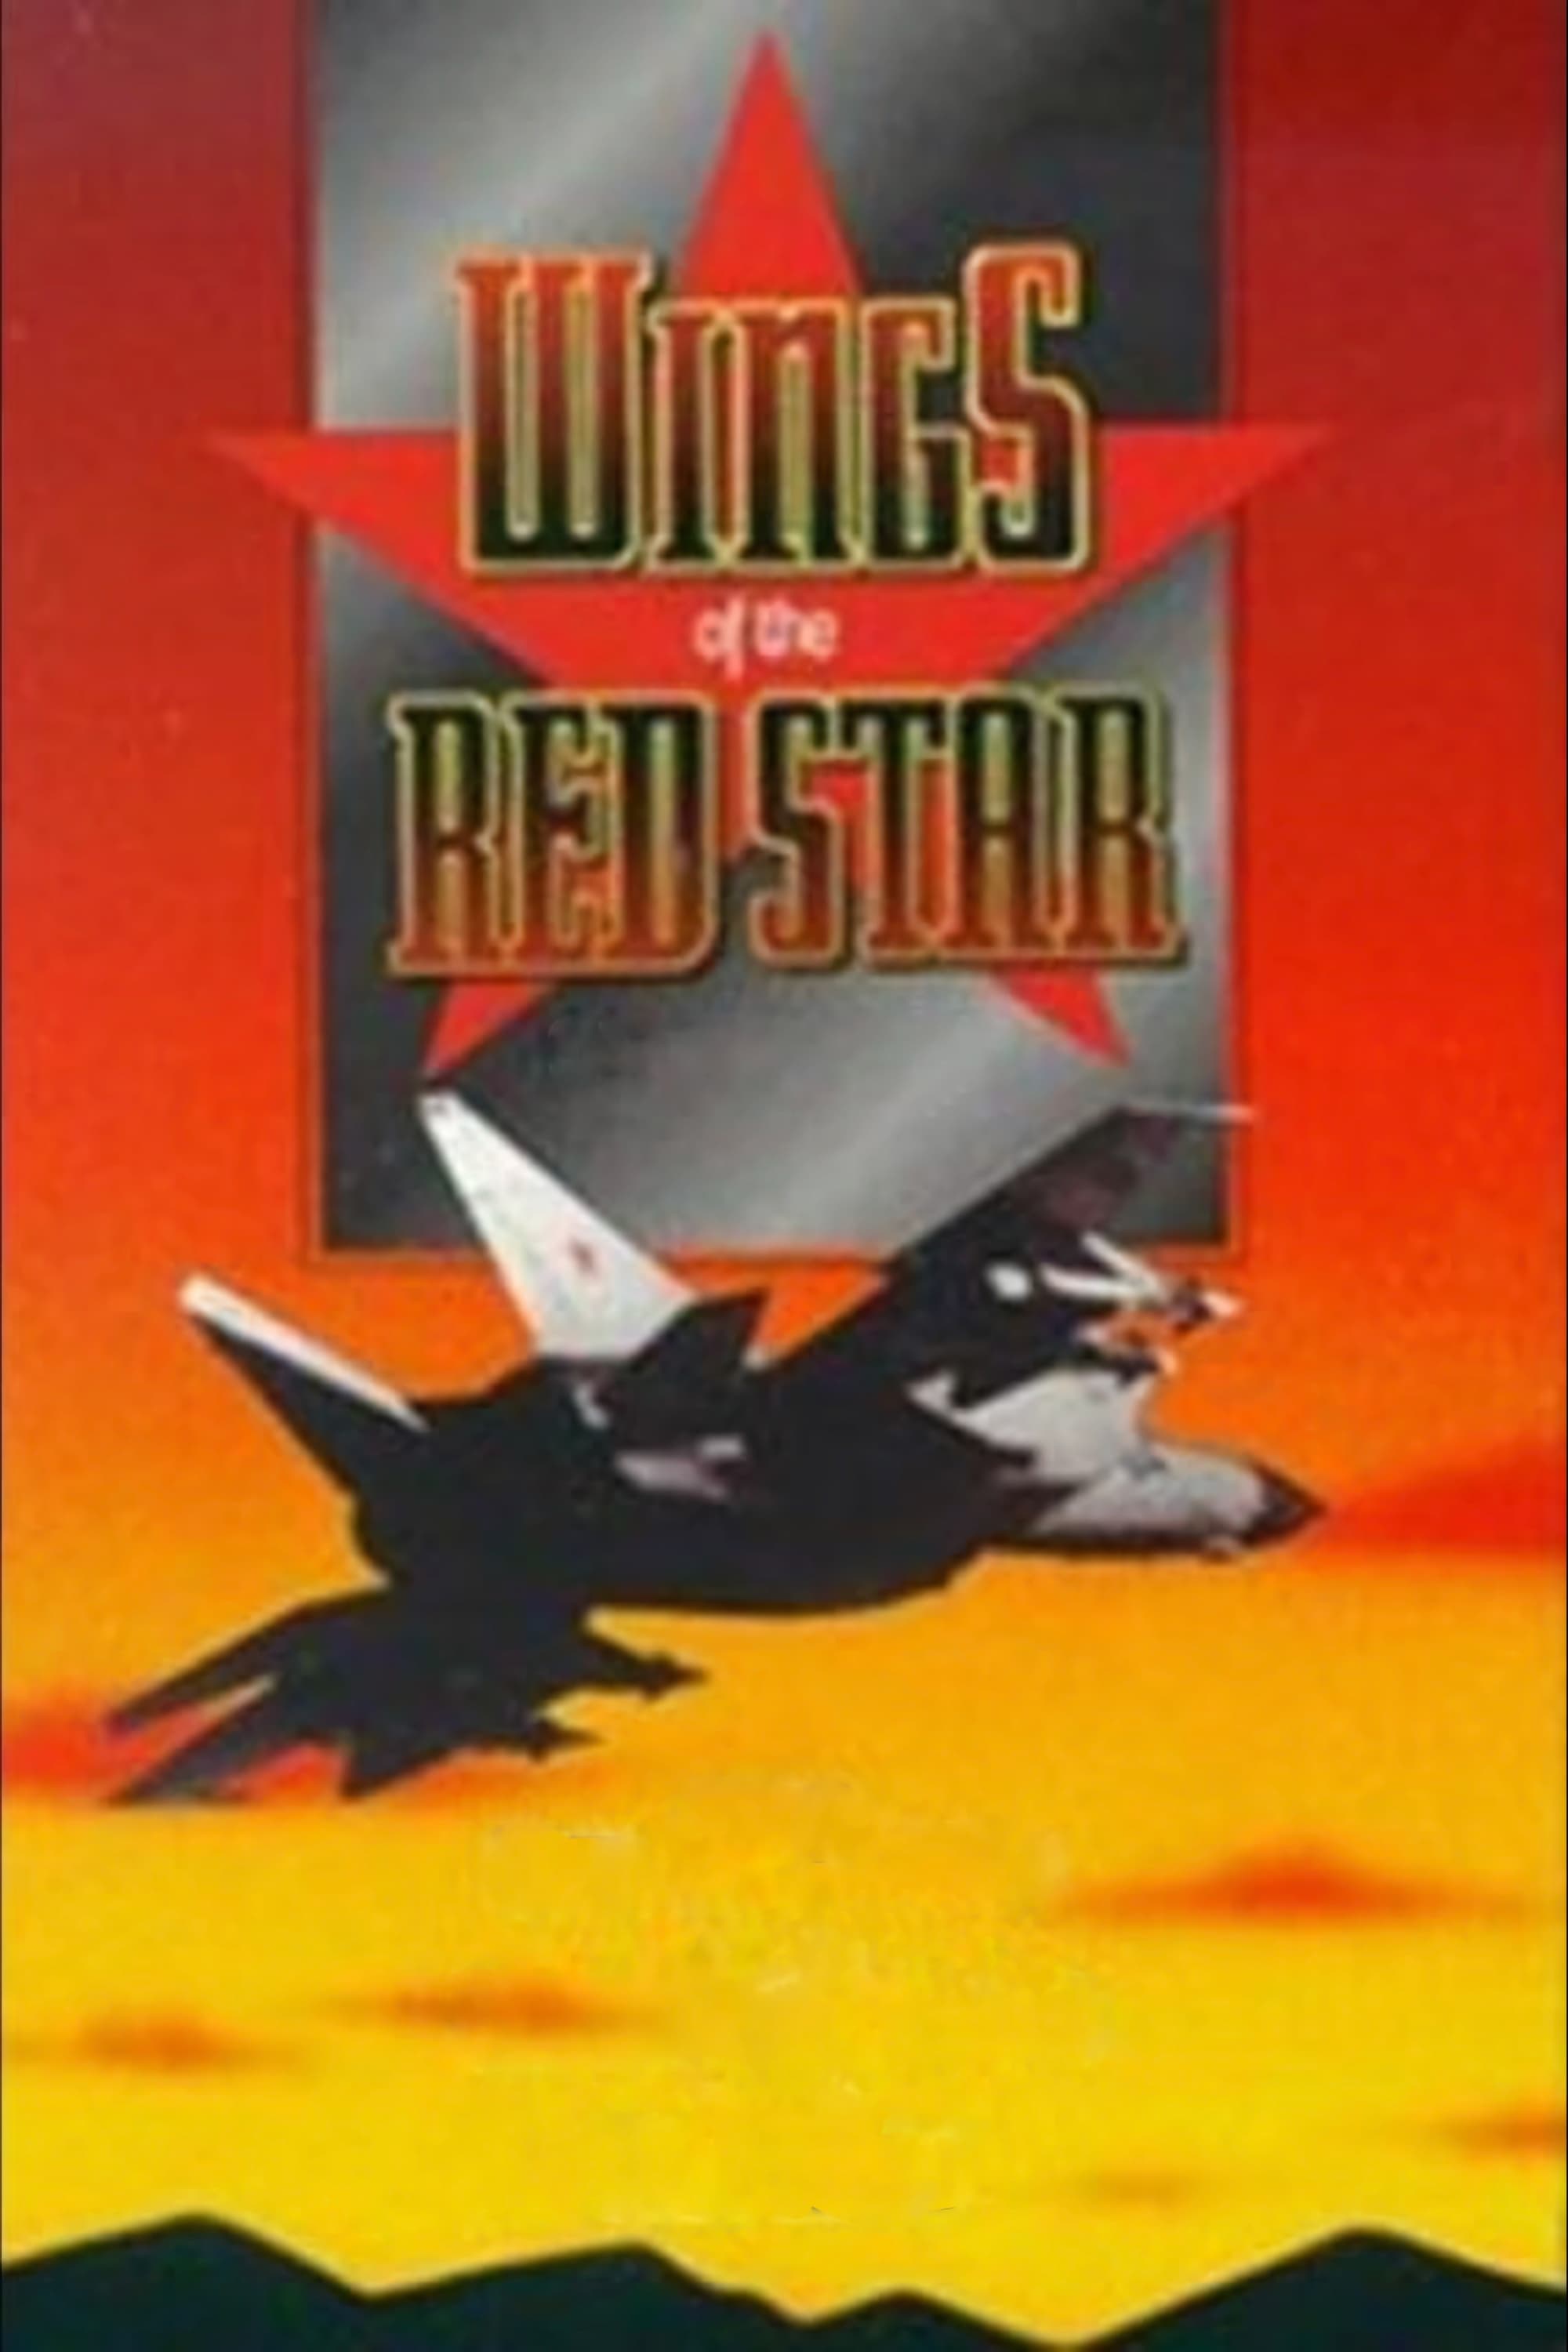 Wings Of The Red Star